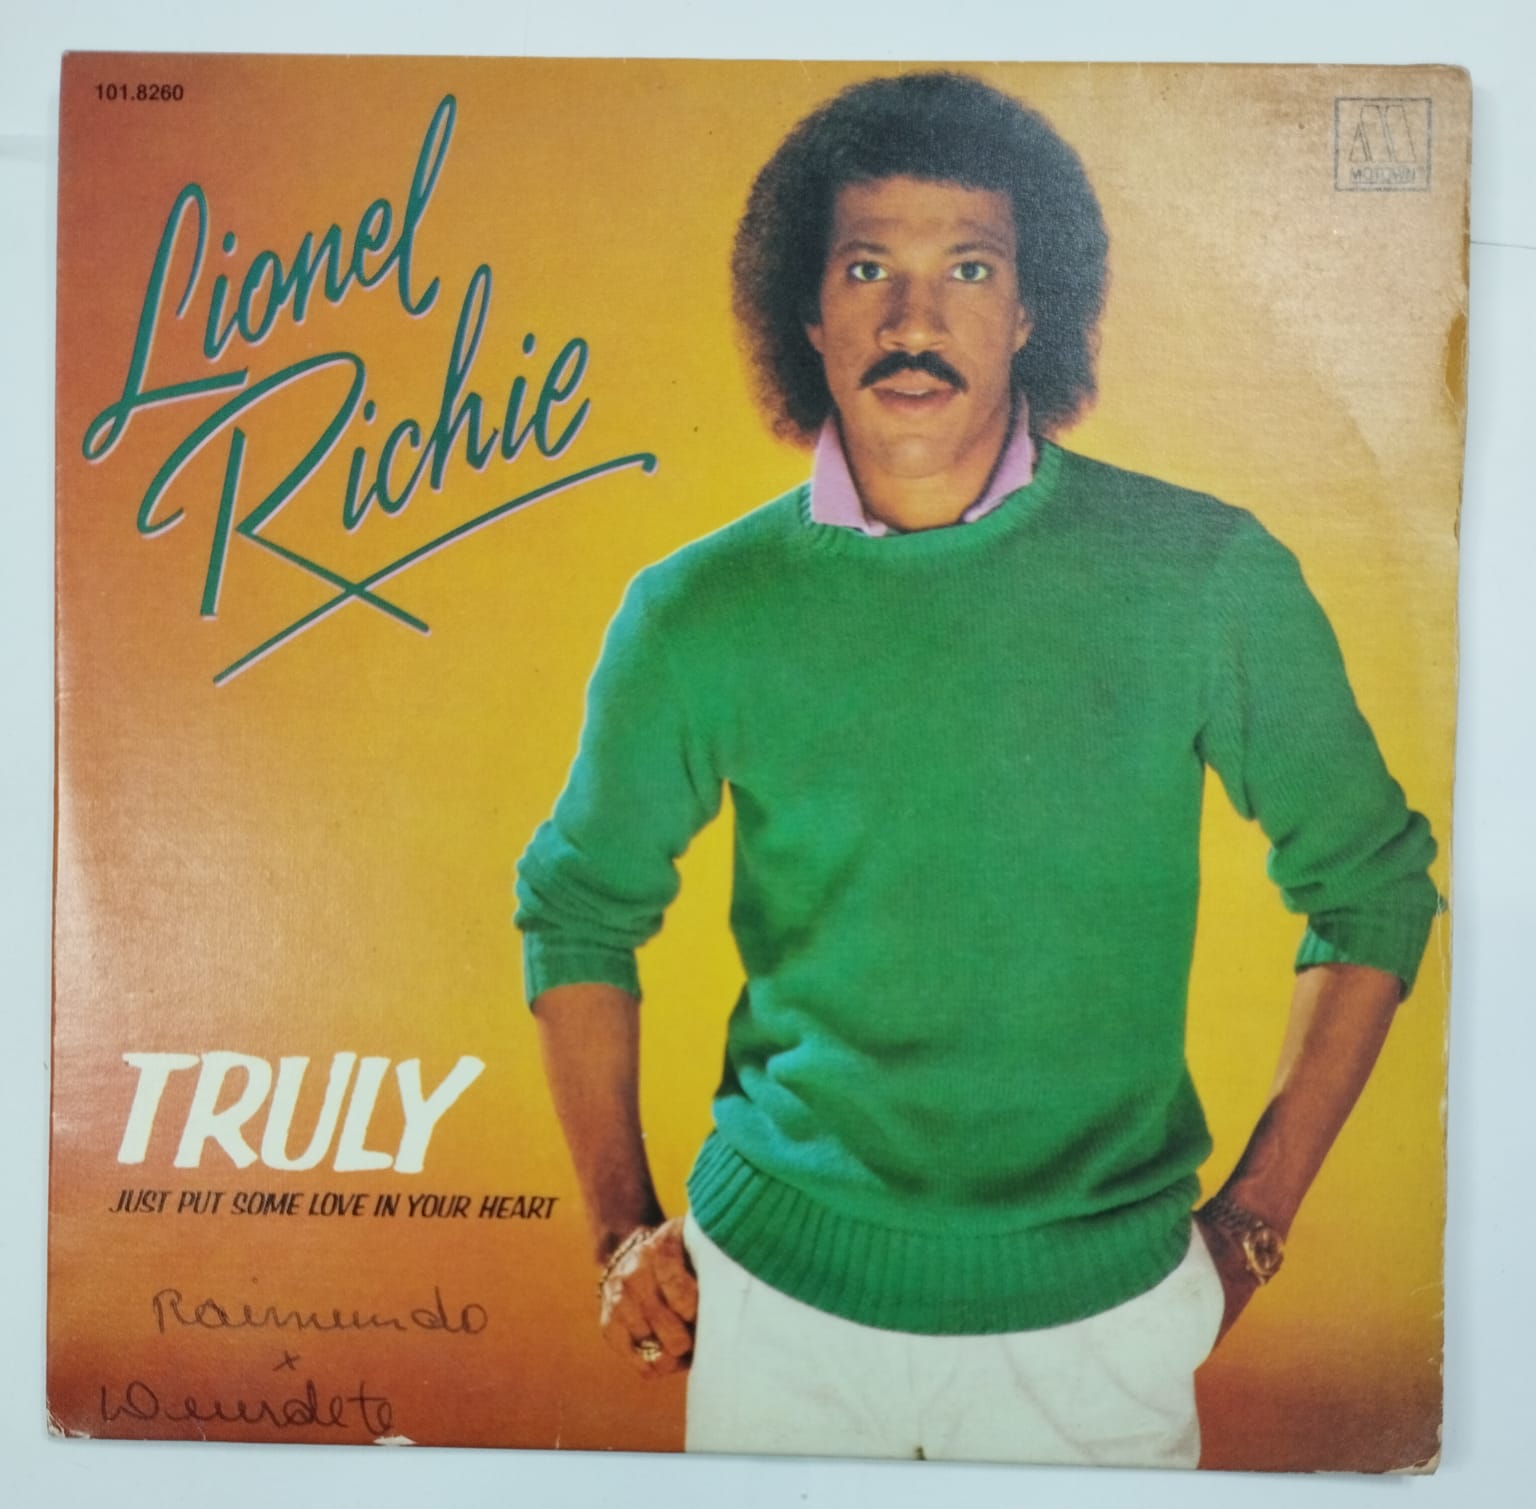 Lionel Richie - Truly / Just Put Some Love In Your Heart (Compacto)